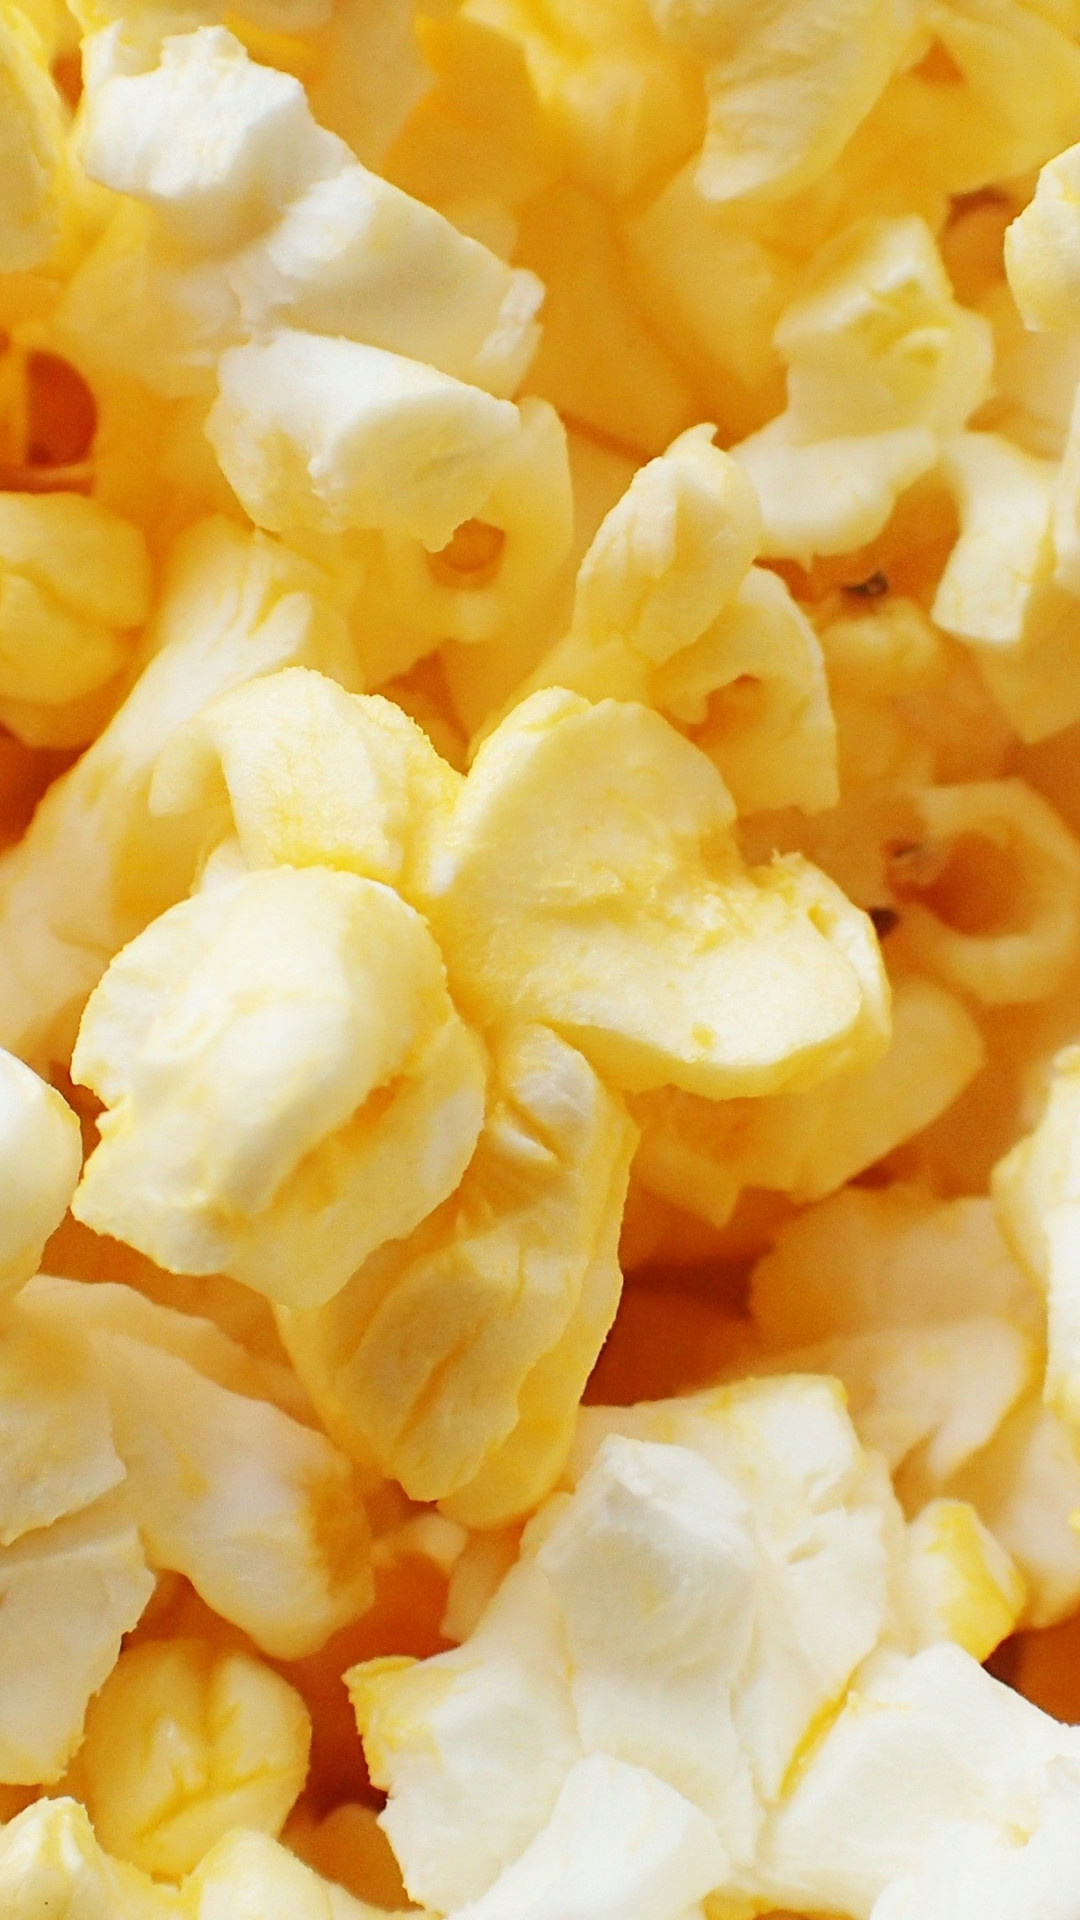 Best popcorn wallpaper, Vibrant background, Tempting snack, High-quality image, 1080x1920 Full HD Handy